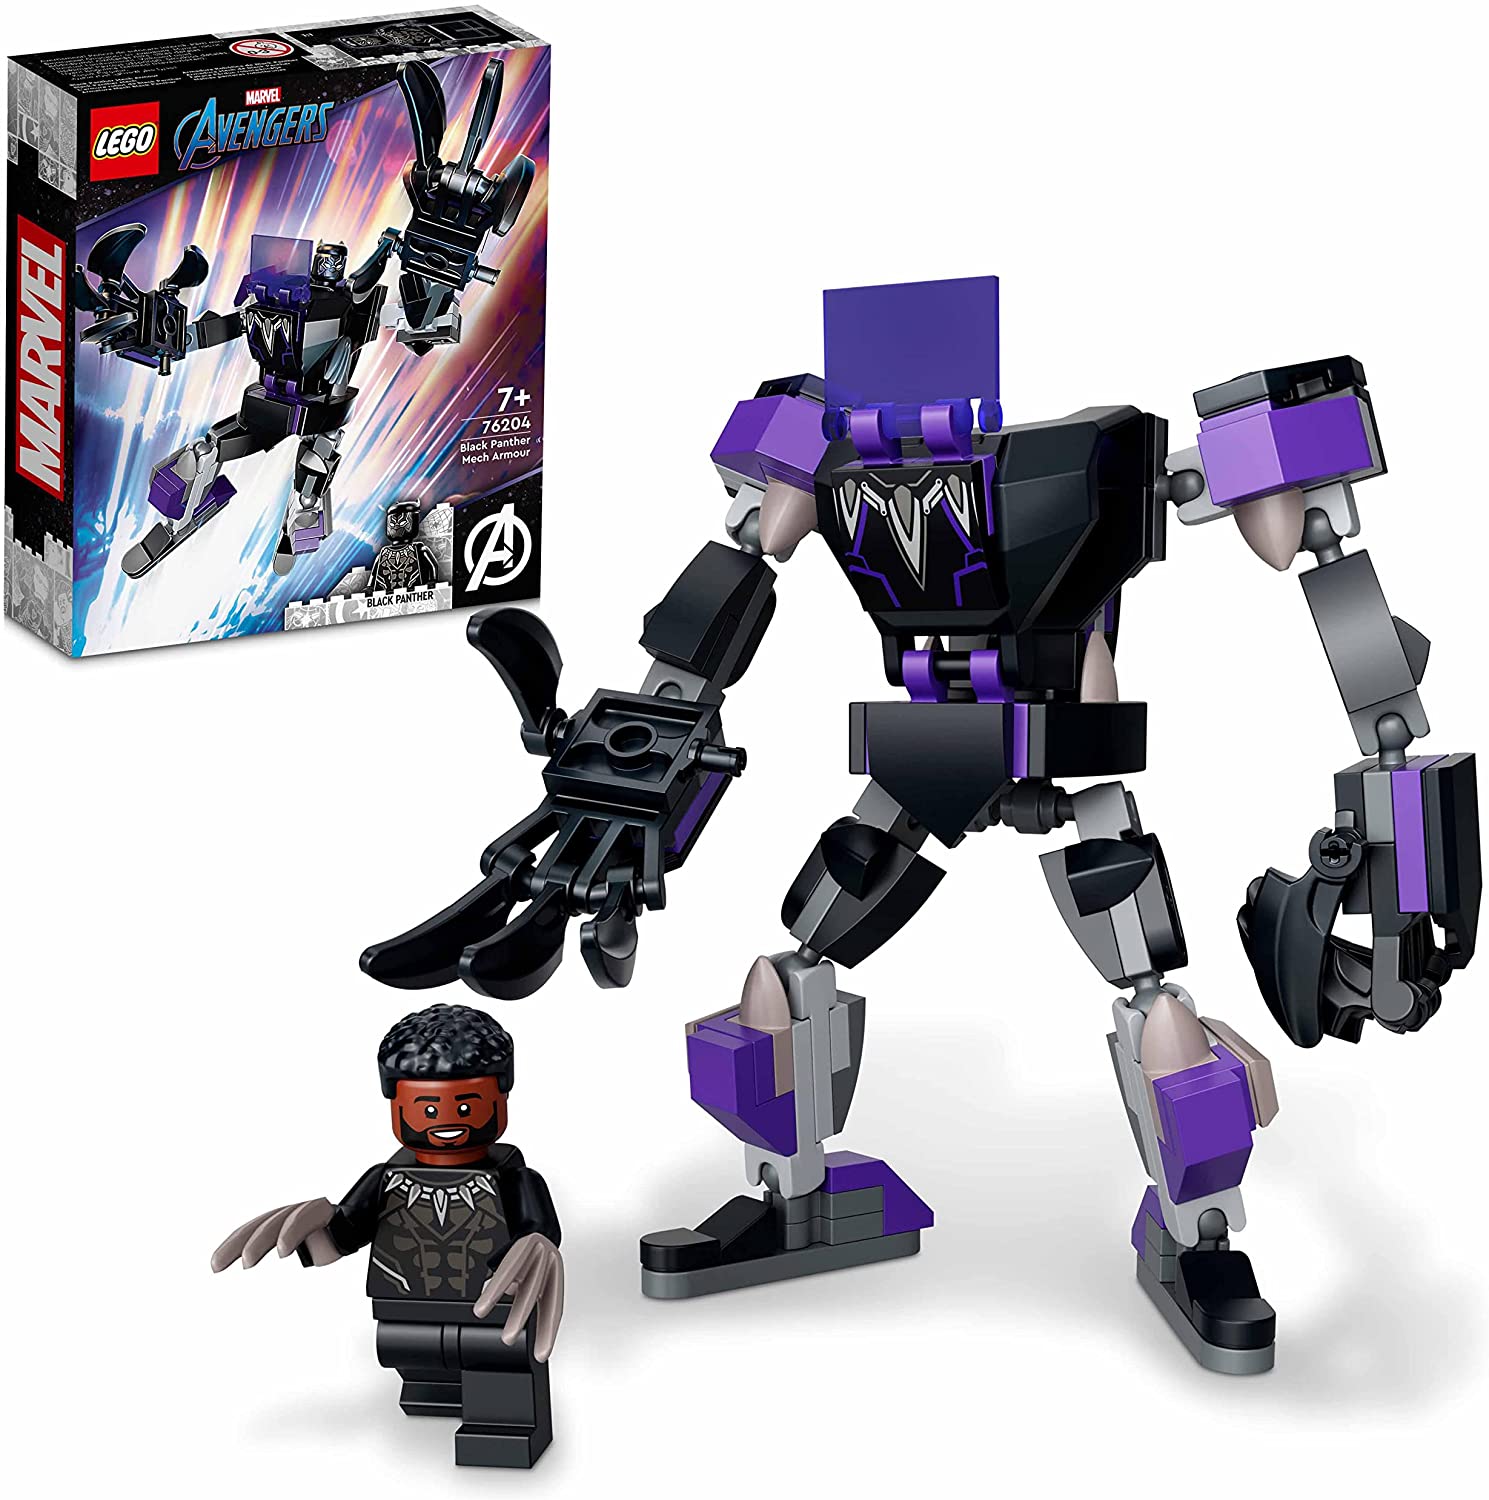 LEGO 76204 Marvel Black Panther Mech Collectable Figure, Superhero Toy for Children from 7 Years with Mini Figure, Avengers Action Figure